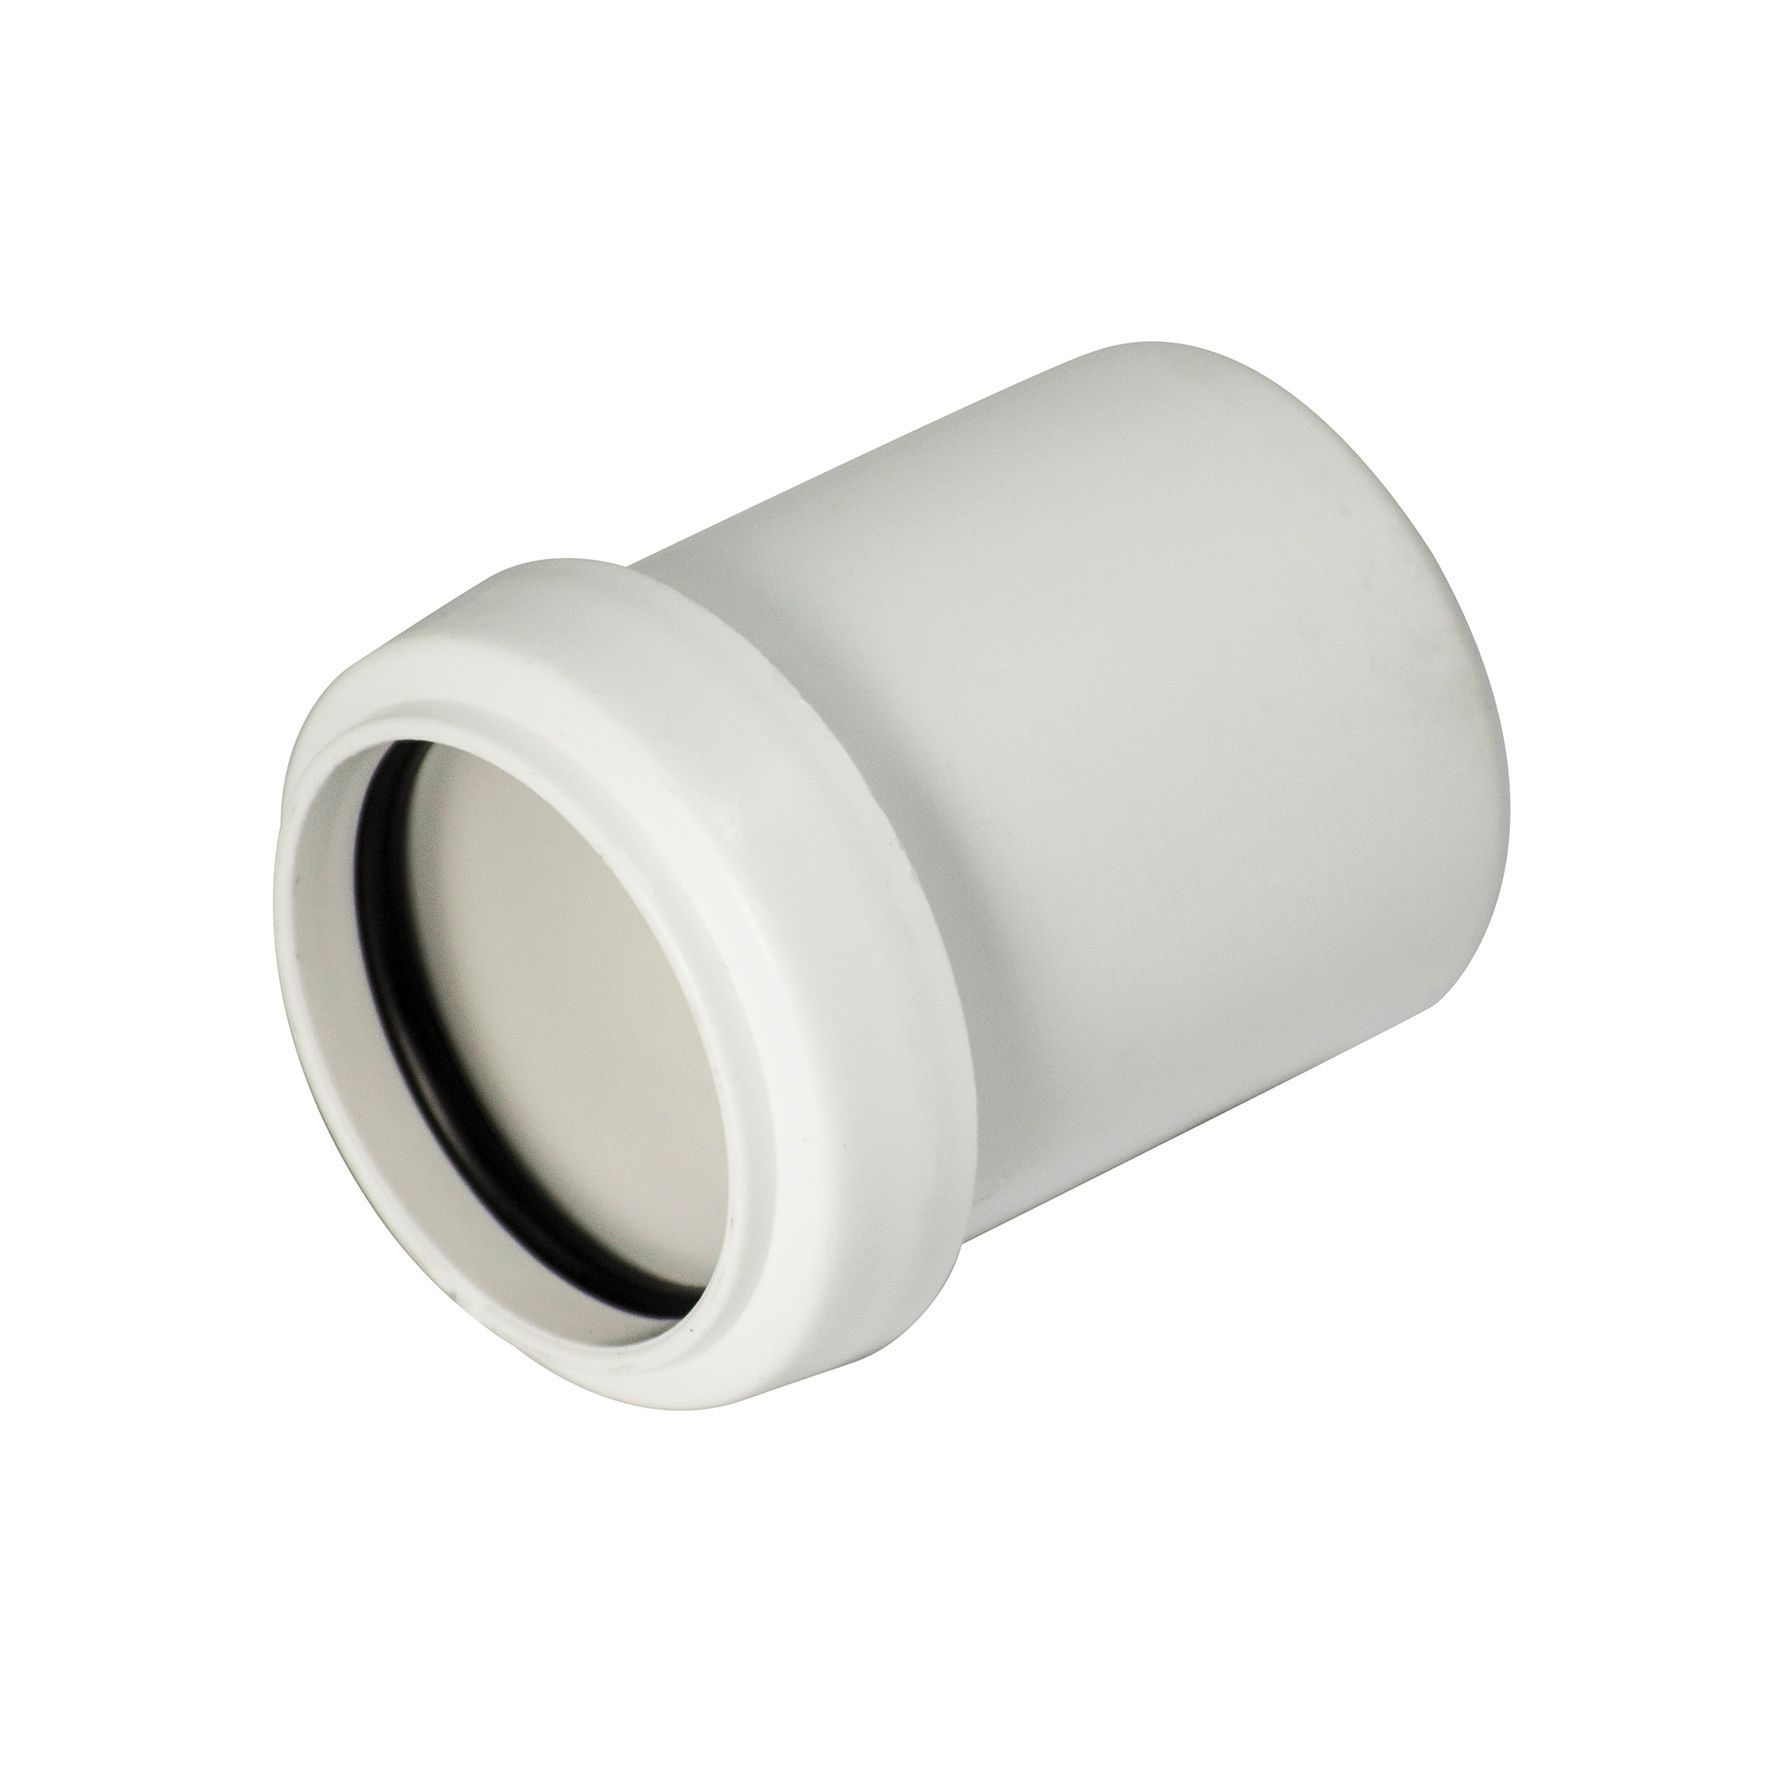 Image of FloPlast WP38W Push-Fit Waste Reducer - White 40mm x 32mm